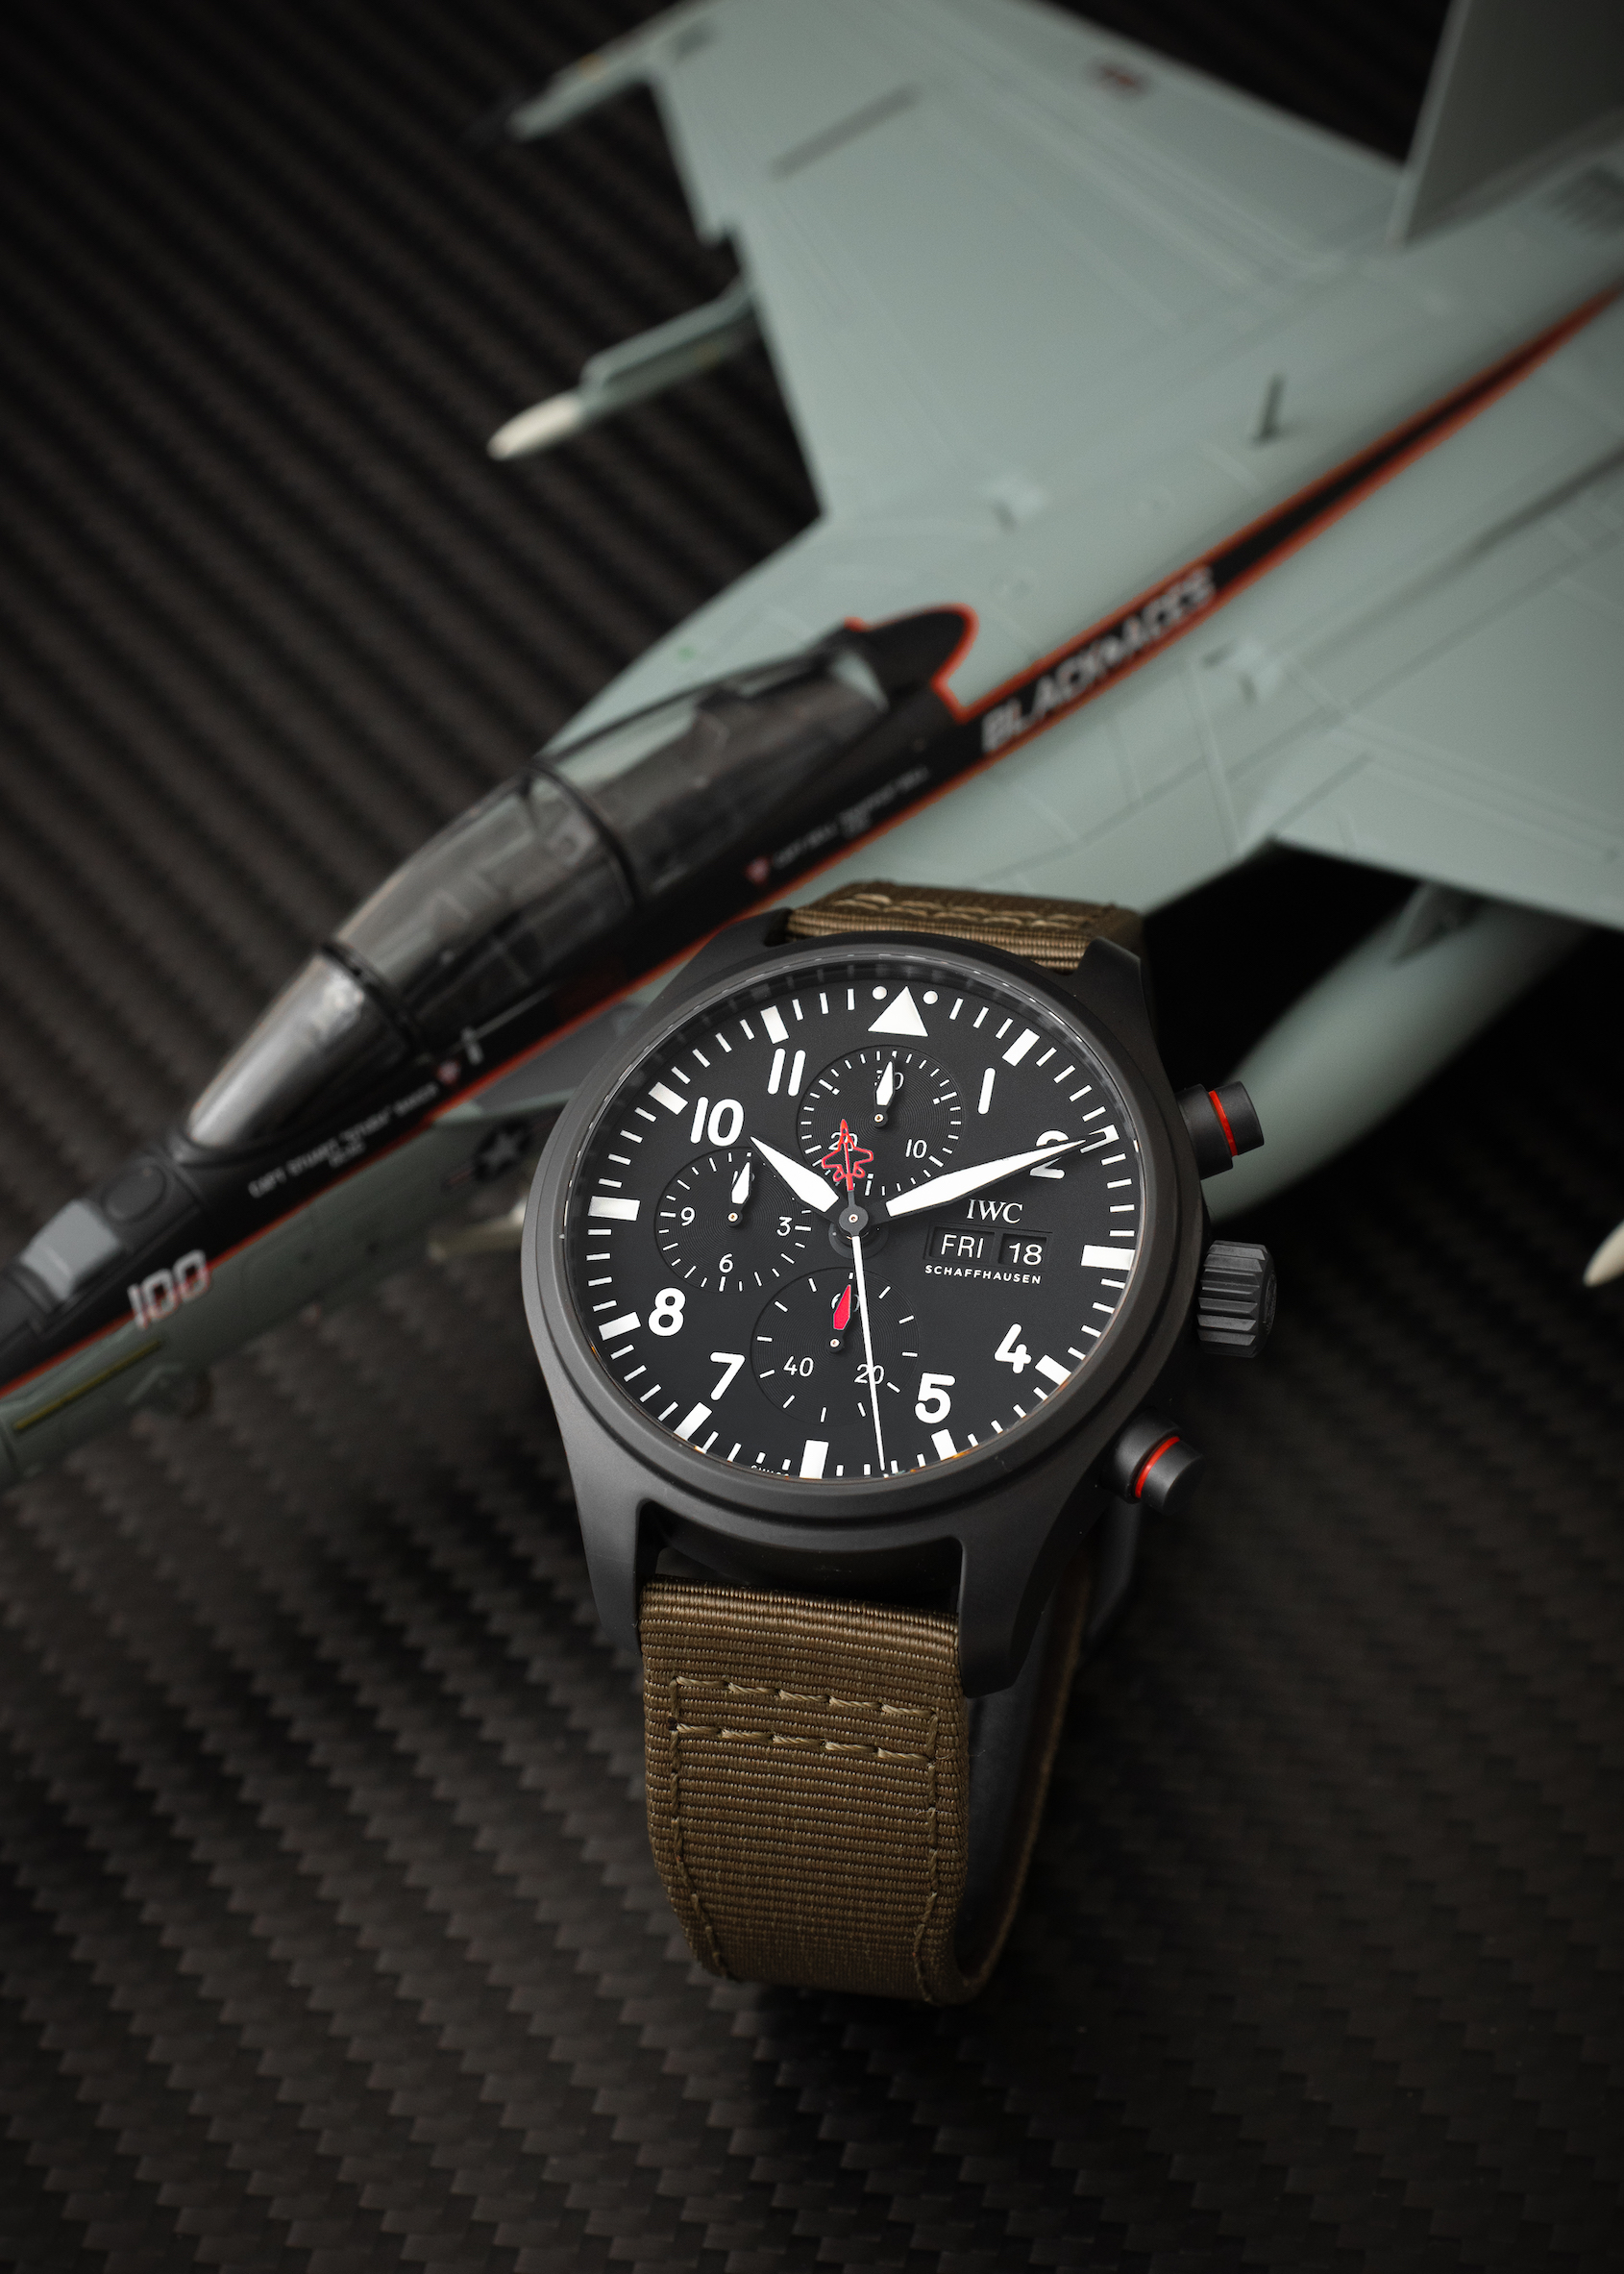 HANDS-ON: Aggressive, unrelenting and tactical, the IWC Pilot’s Watch